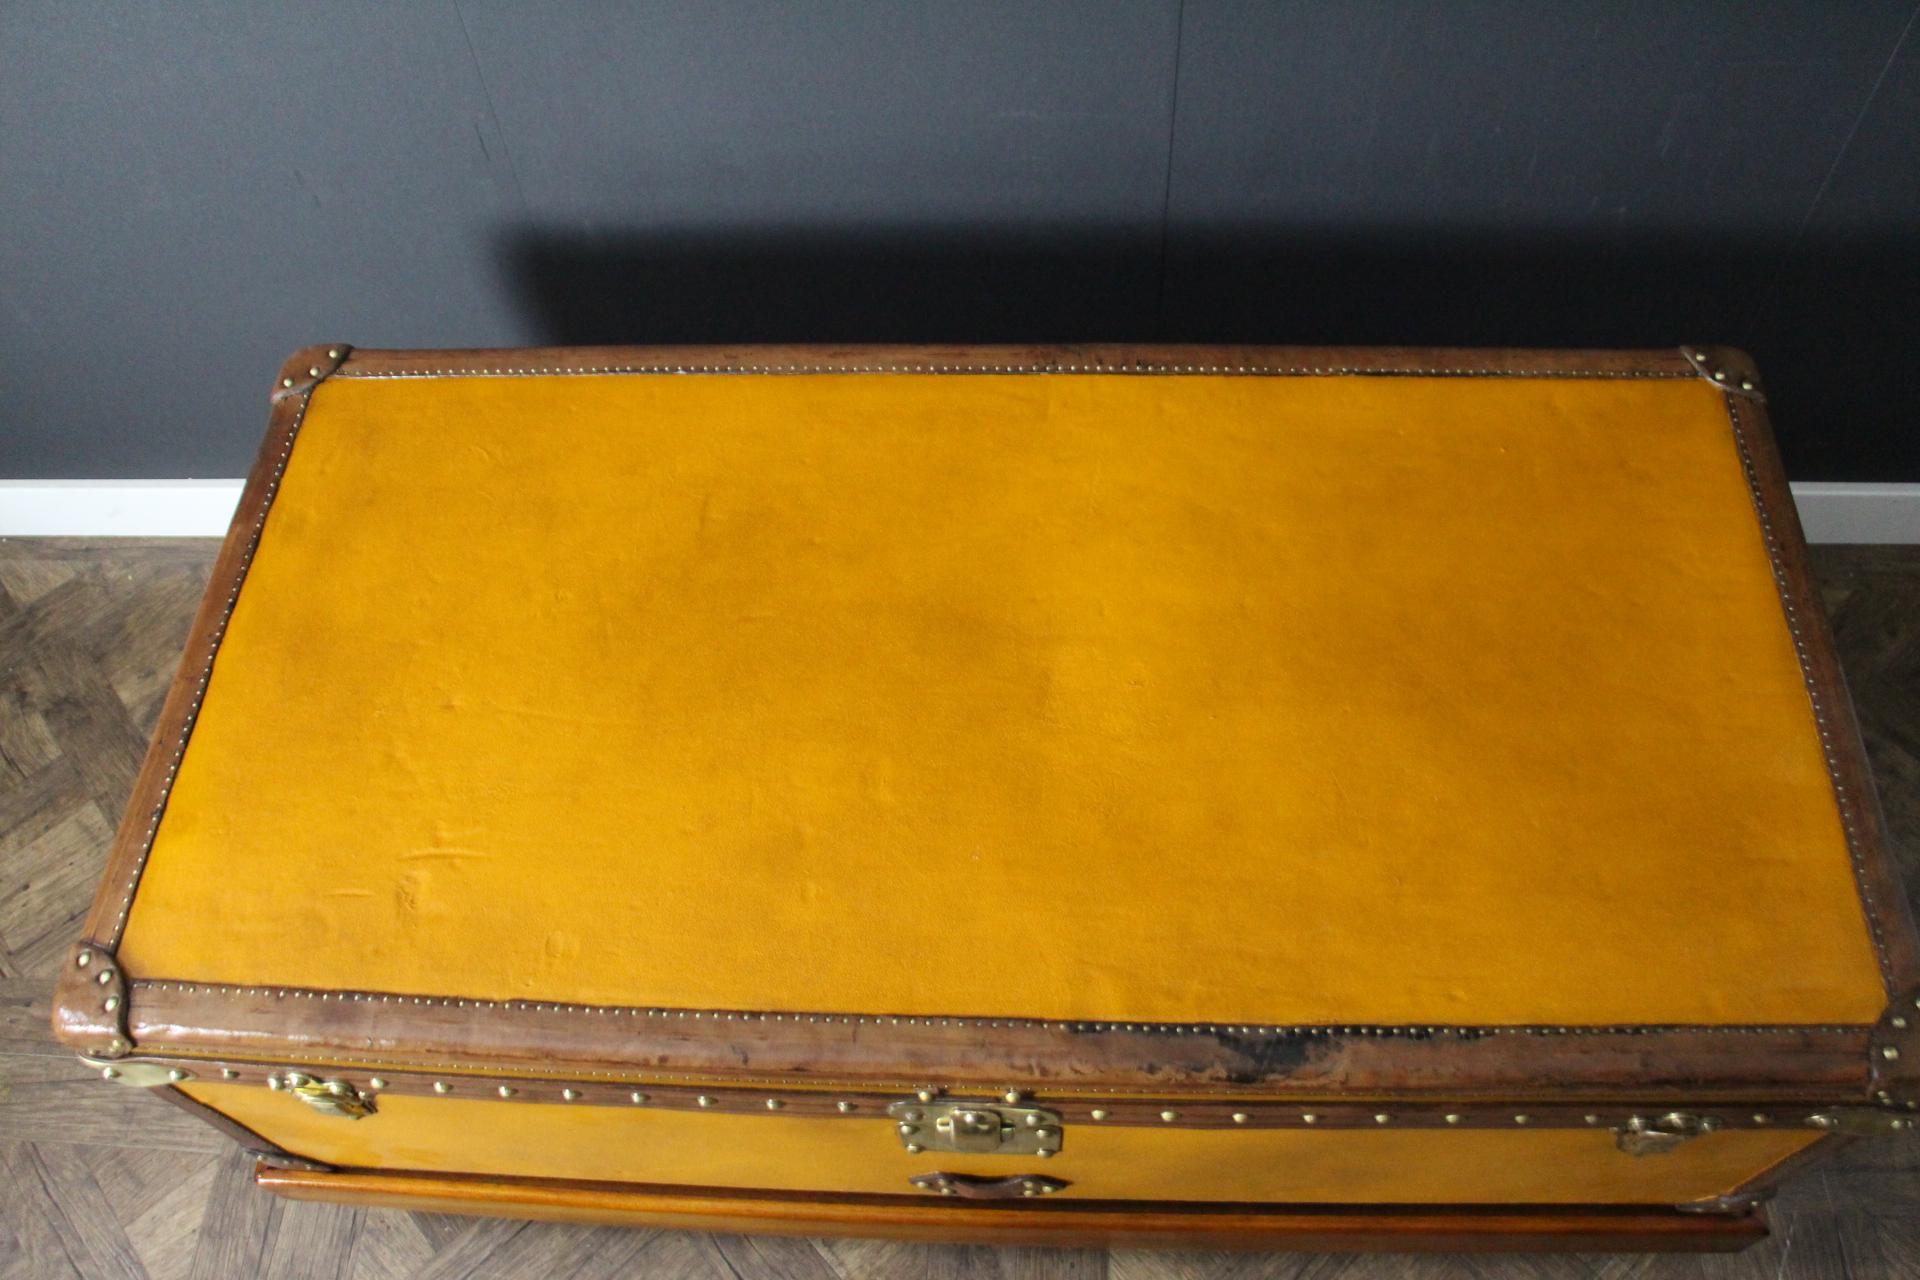 This very nice orange canvas Louis Vuitton steamer trunk, features Louis Vuitton stamped solid brass lock, clasps as well as all its studs. Beautiful and rich chocolate color all leather trim and handles. Unusual and elegant proportions.
It is